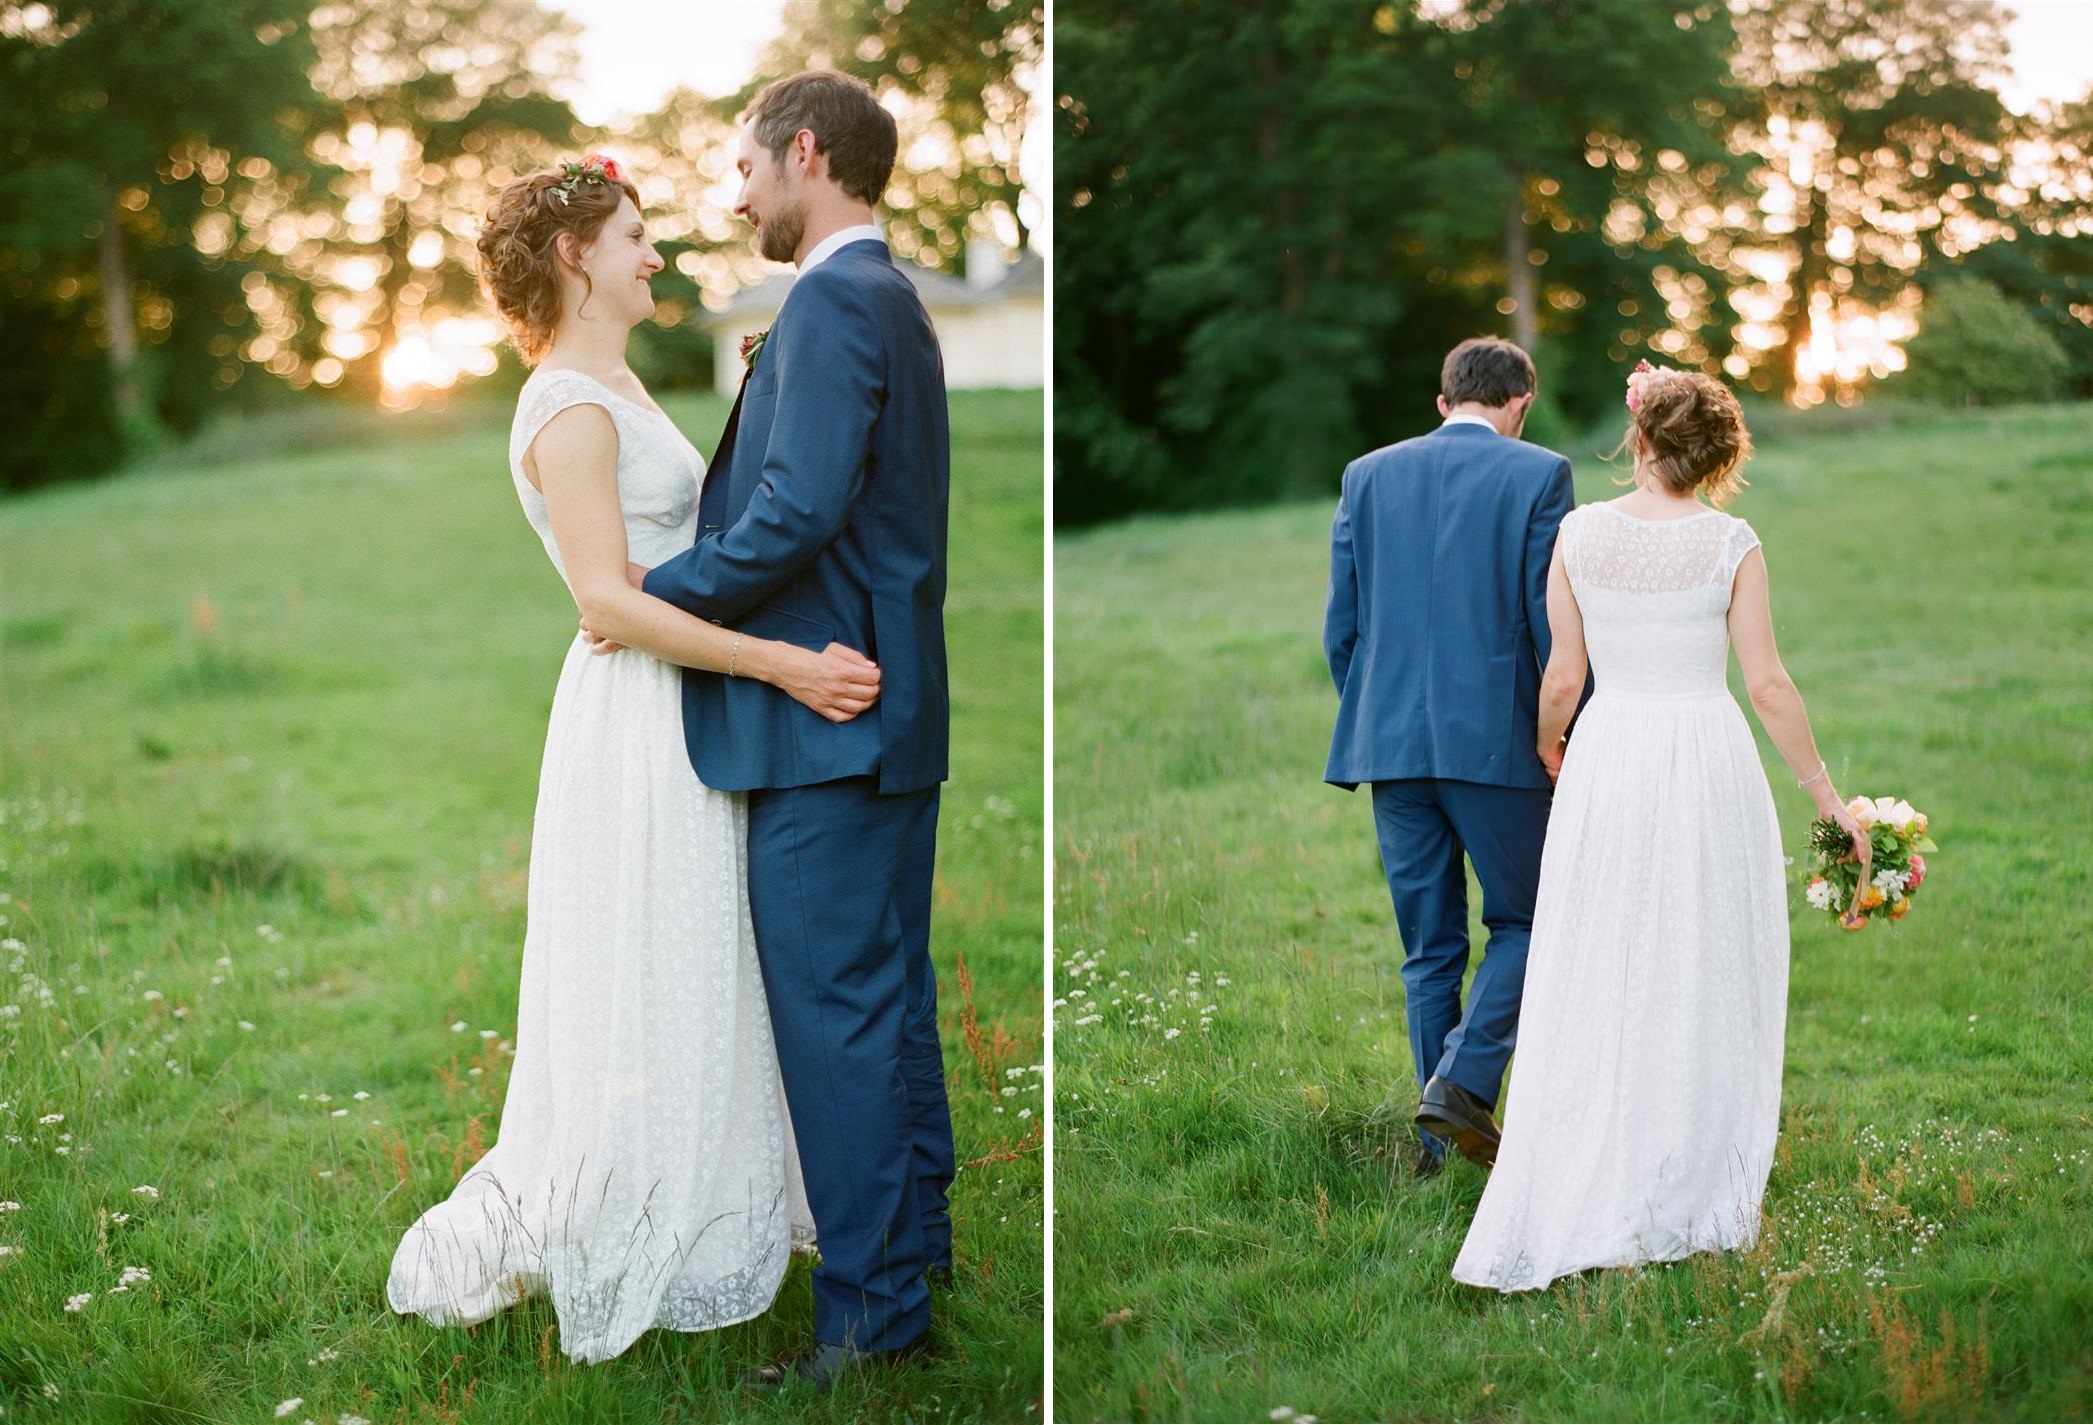 A 1940s Wedding Dress for a Sweet Early Summer Wedding from Taylor & Porter Photography